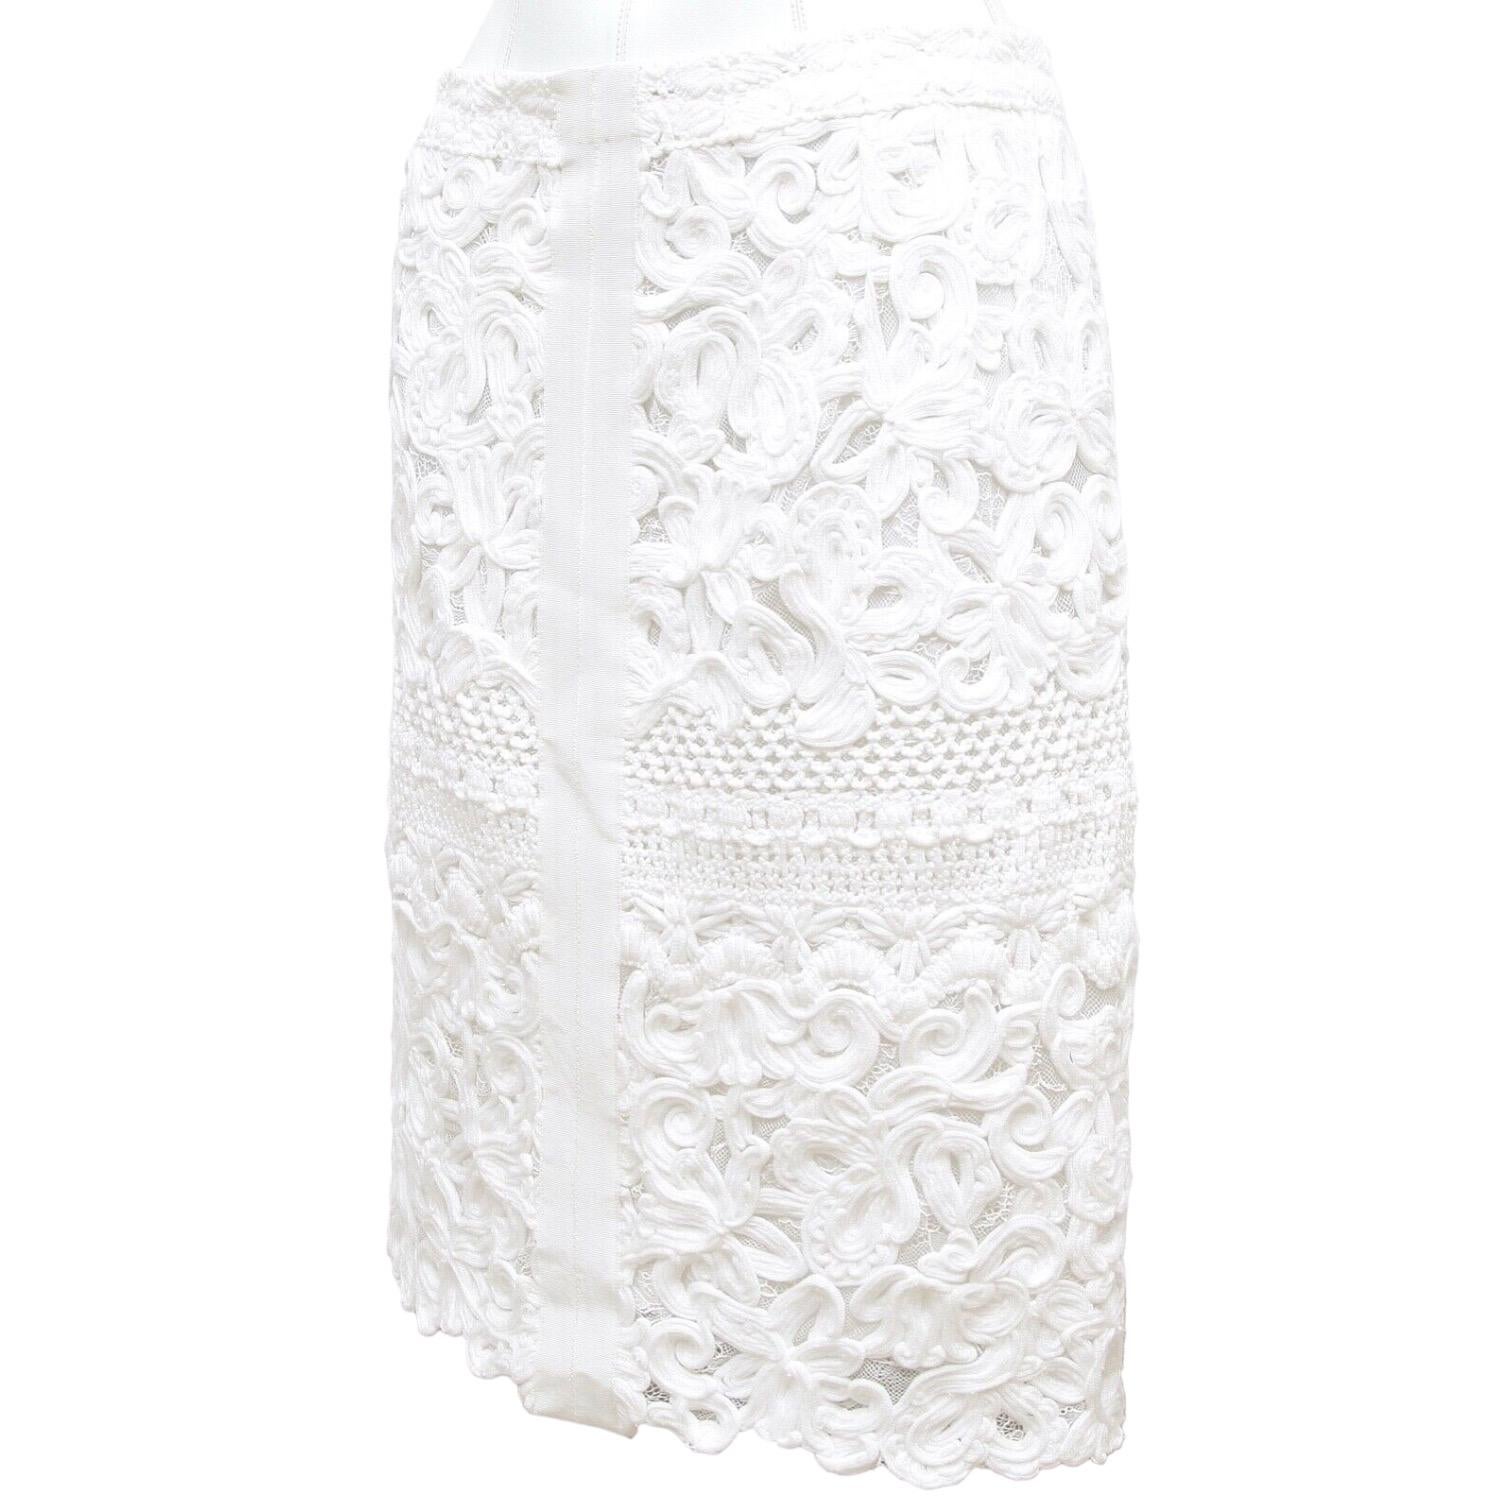 ERMANNO SCERVINO White Skirt Lace Pencil Lined Zipper Sz 40 NWT $1655 In New Condition For Sale In Hollywood, FL